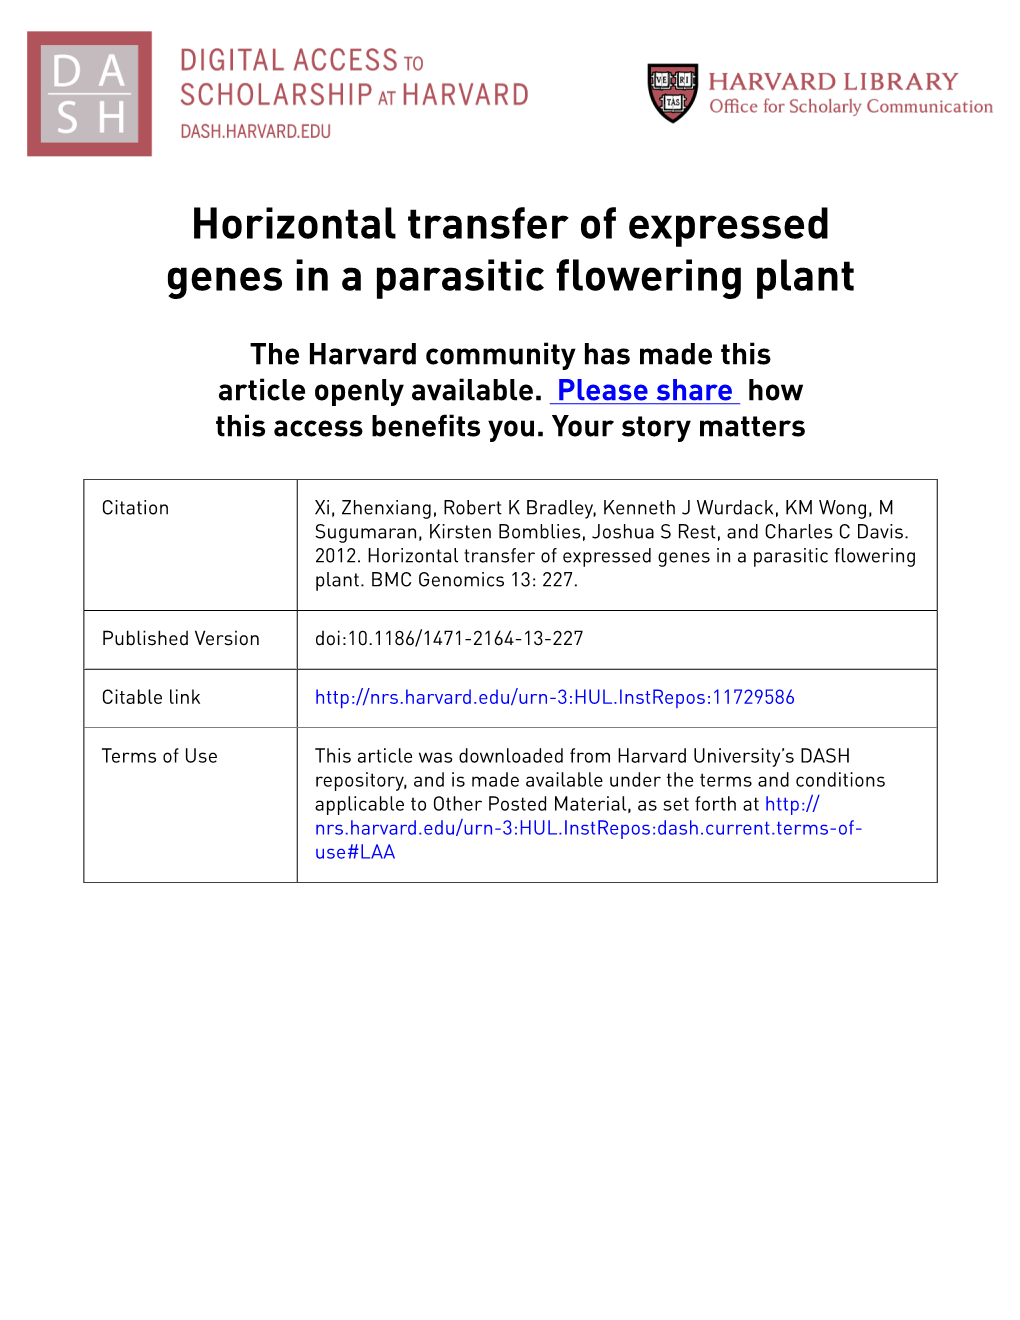 Horizontal Transfer of Expressed Genes in a Parasitic Flowering Plant